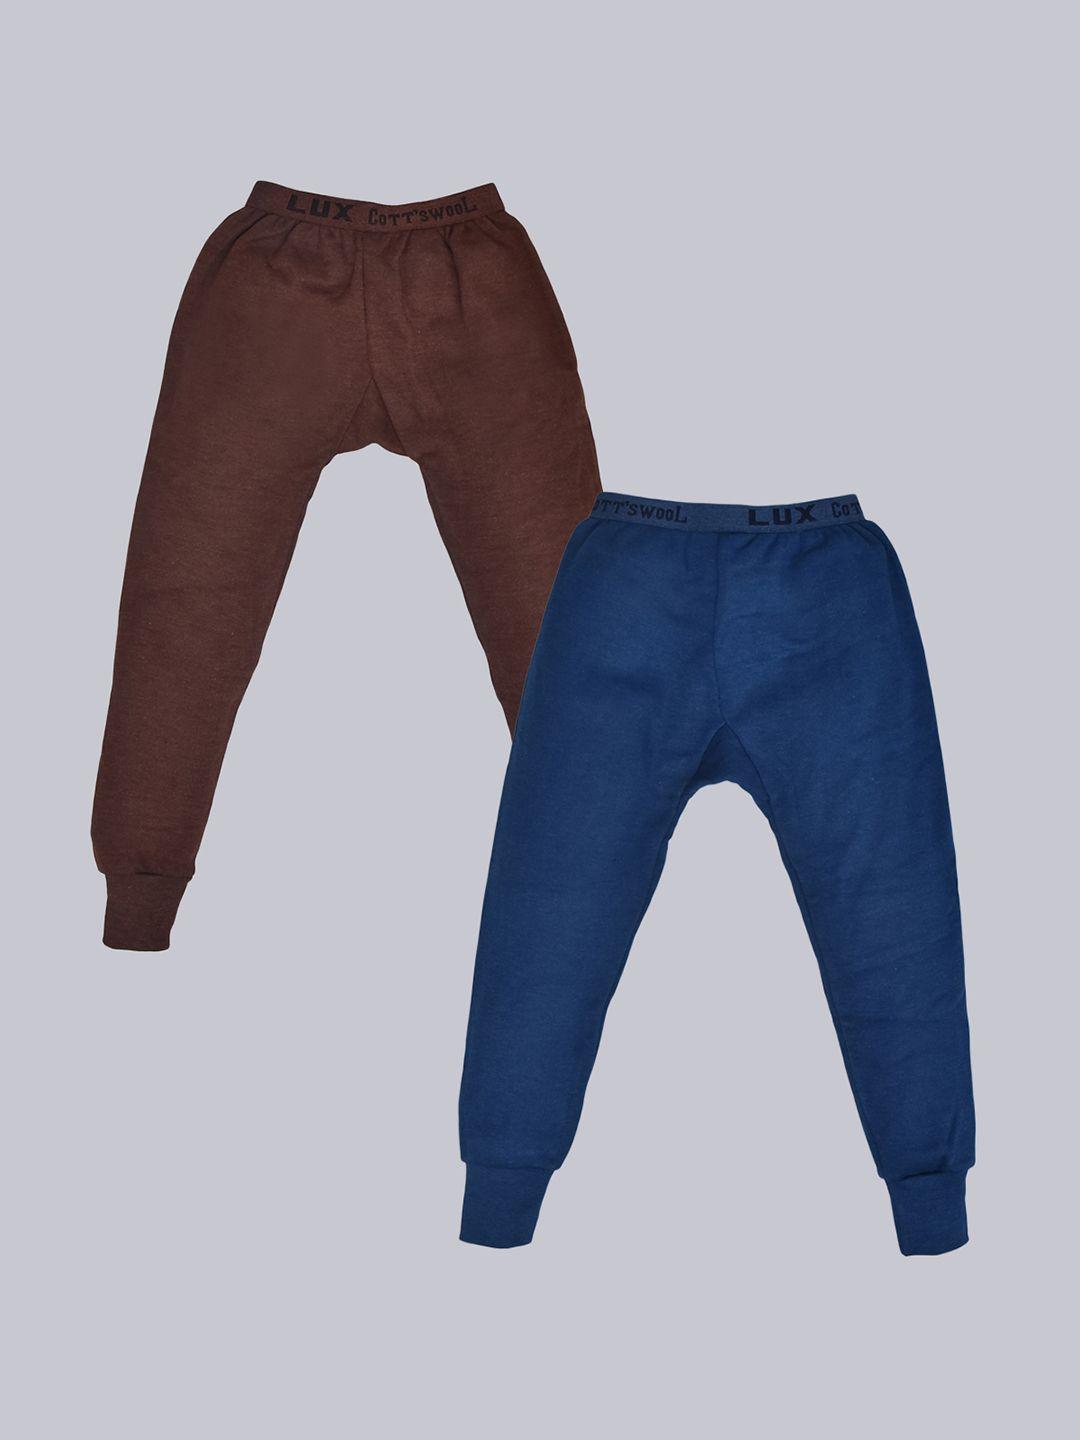 lux cottswool boys set of 2 blue & brown solid cotton thermal bottoms